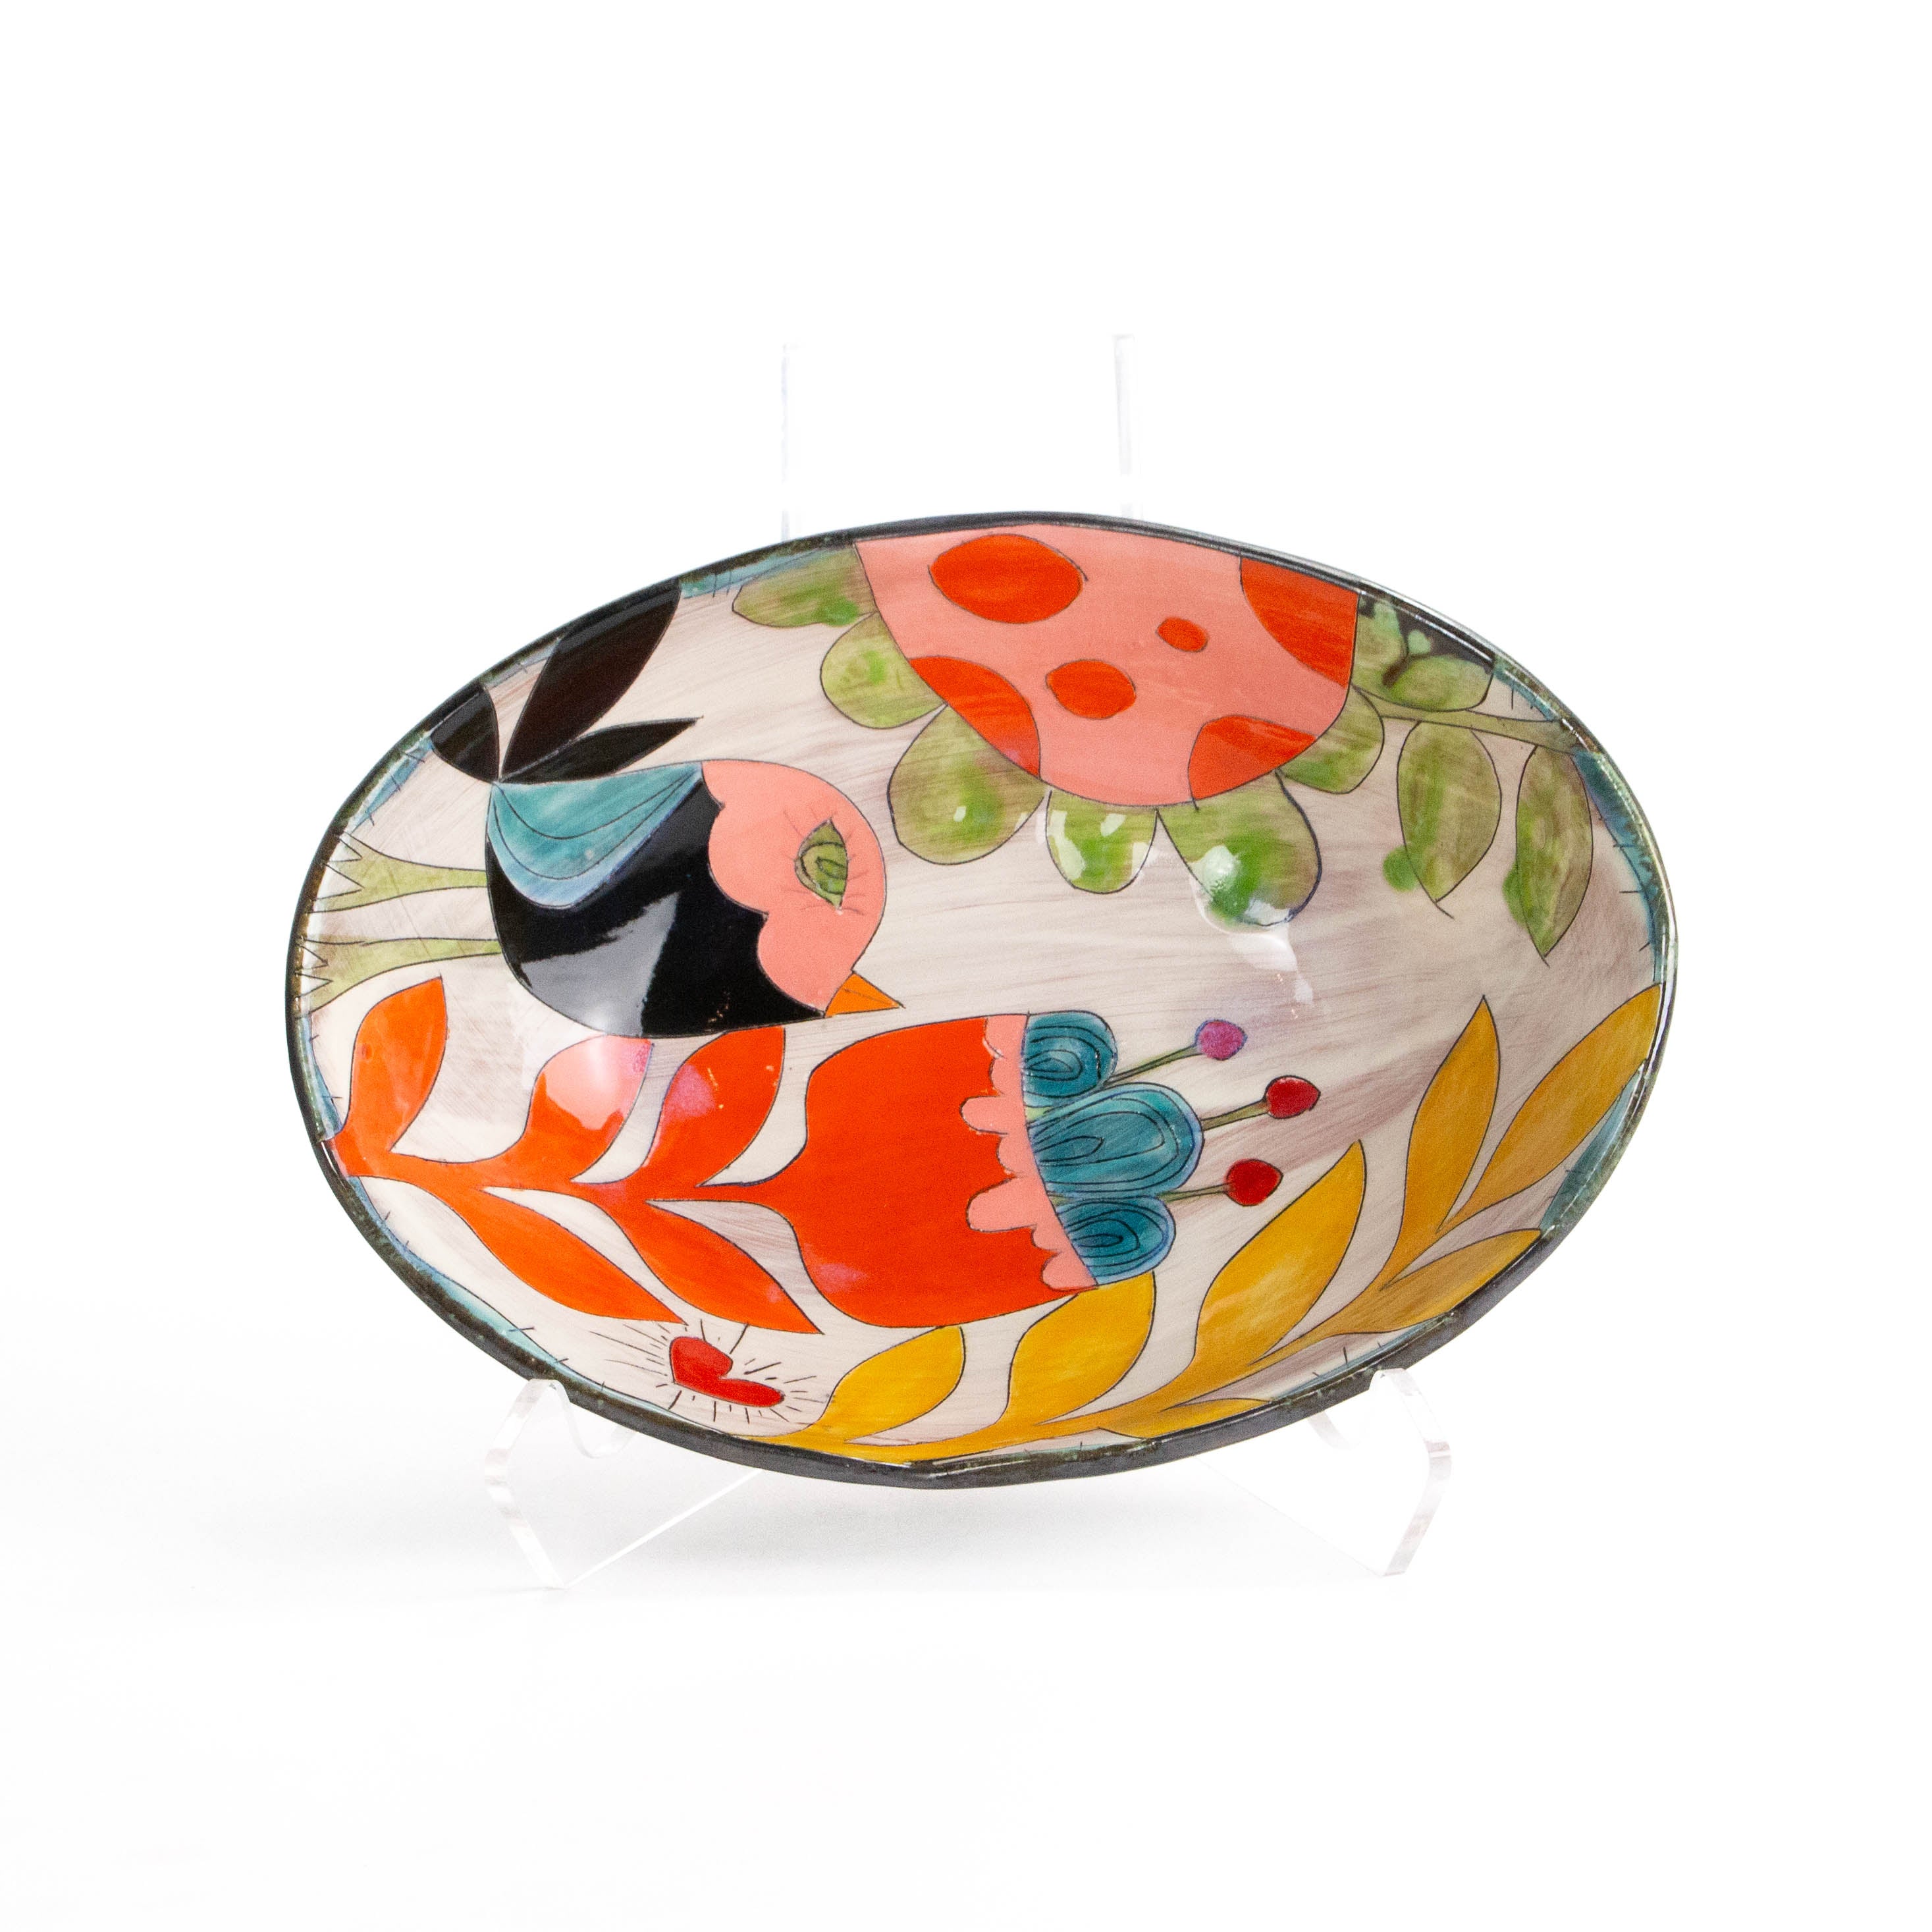 Small Meadow Dream Oval Bowl